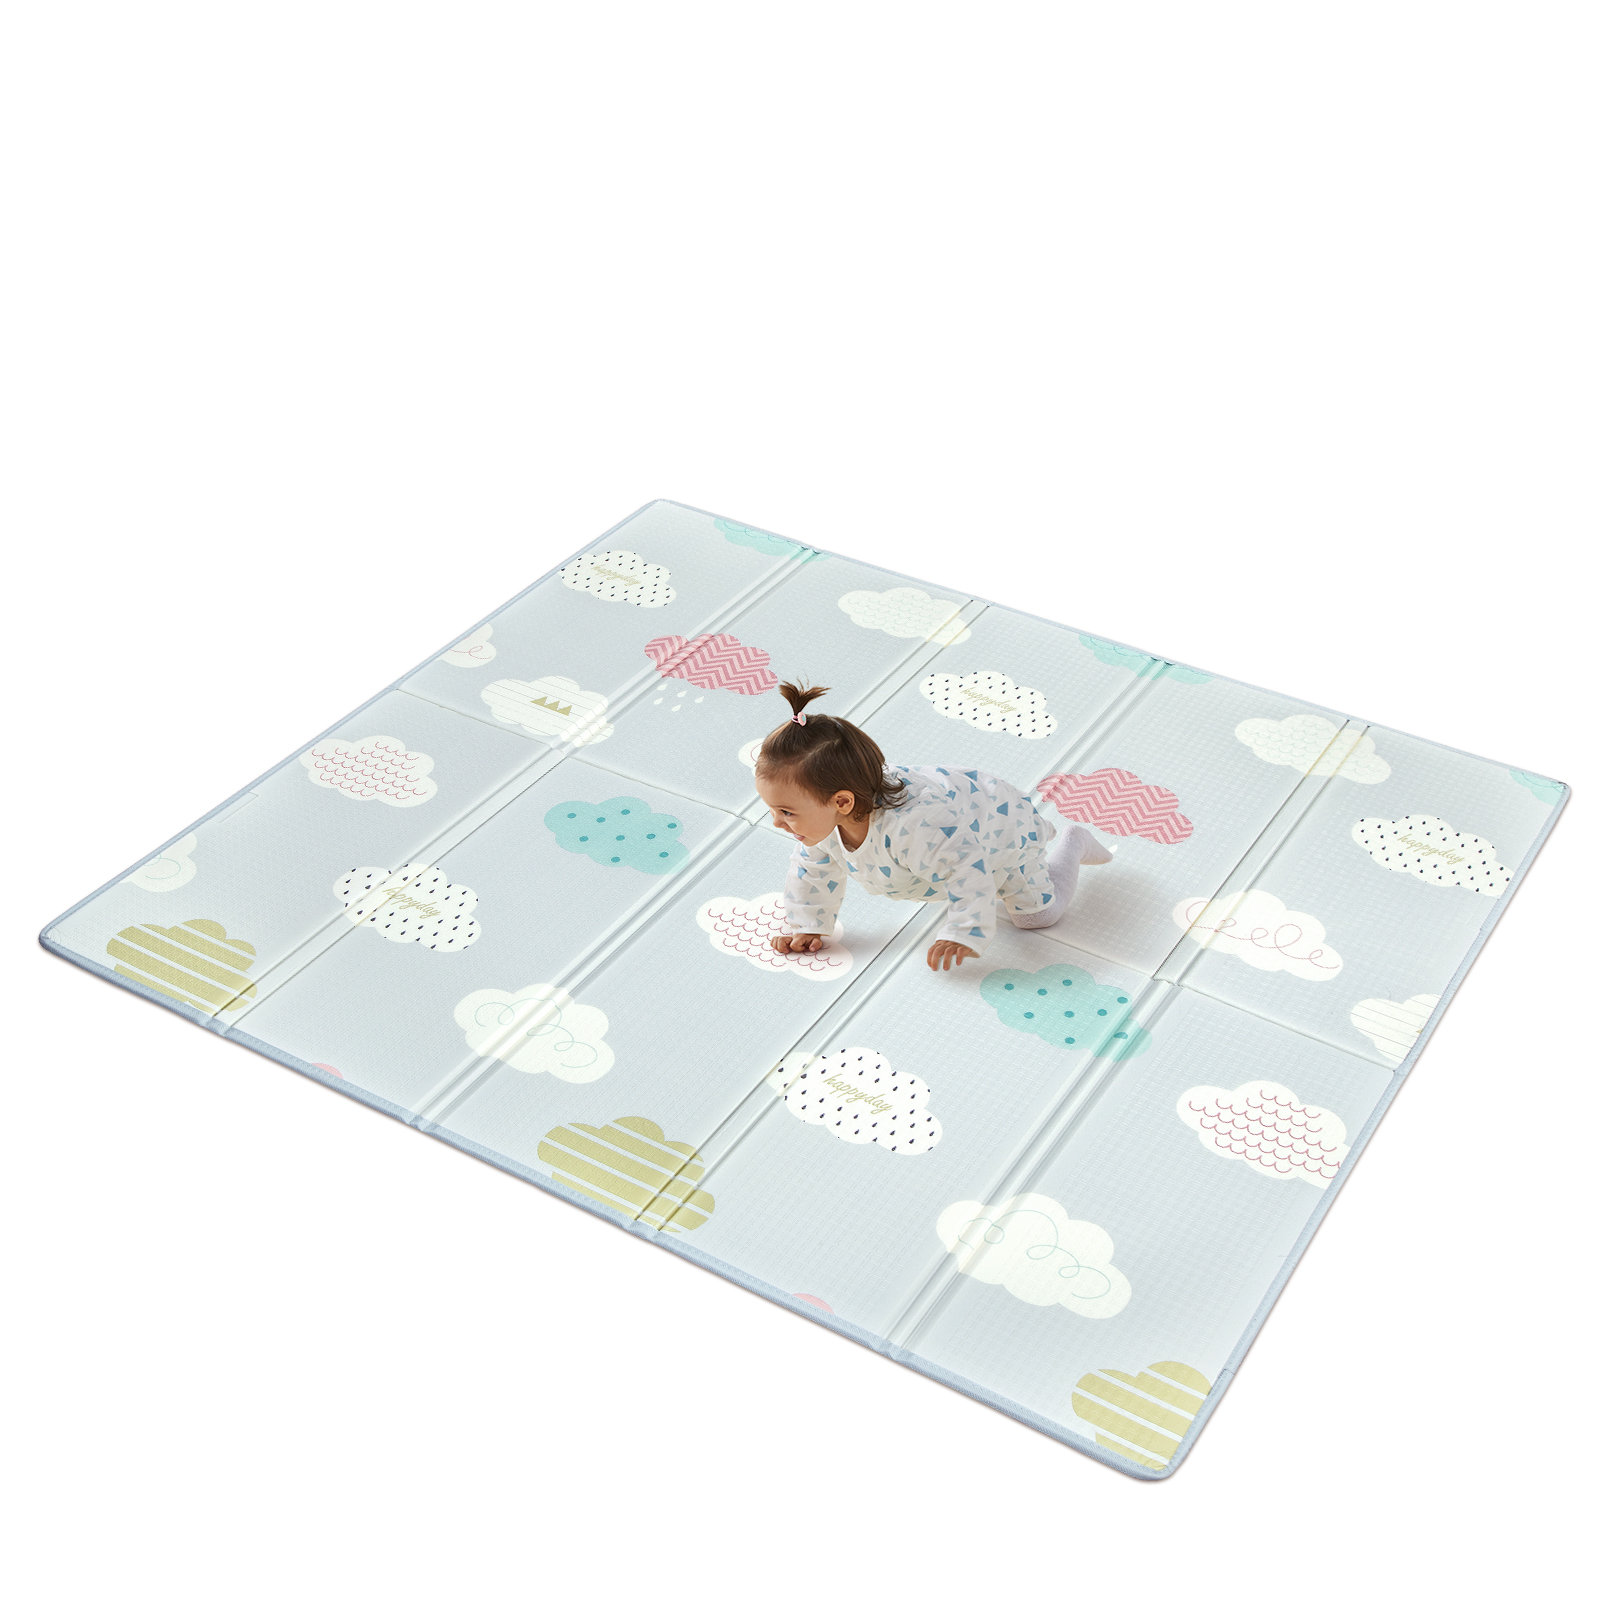 Reversible Baby Play Mat 78x71 - Extra Large, Foldable, Thick Foam Mat  for Crawling, Infants, Toddlers - Indoor/Outdoor Use, BPA-Free - Includes  Travel Bag